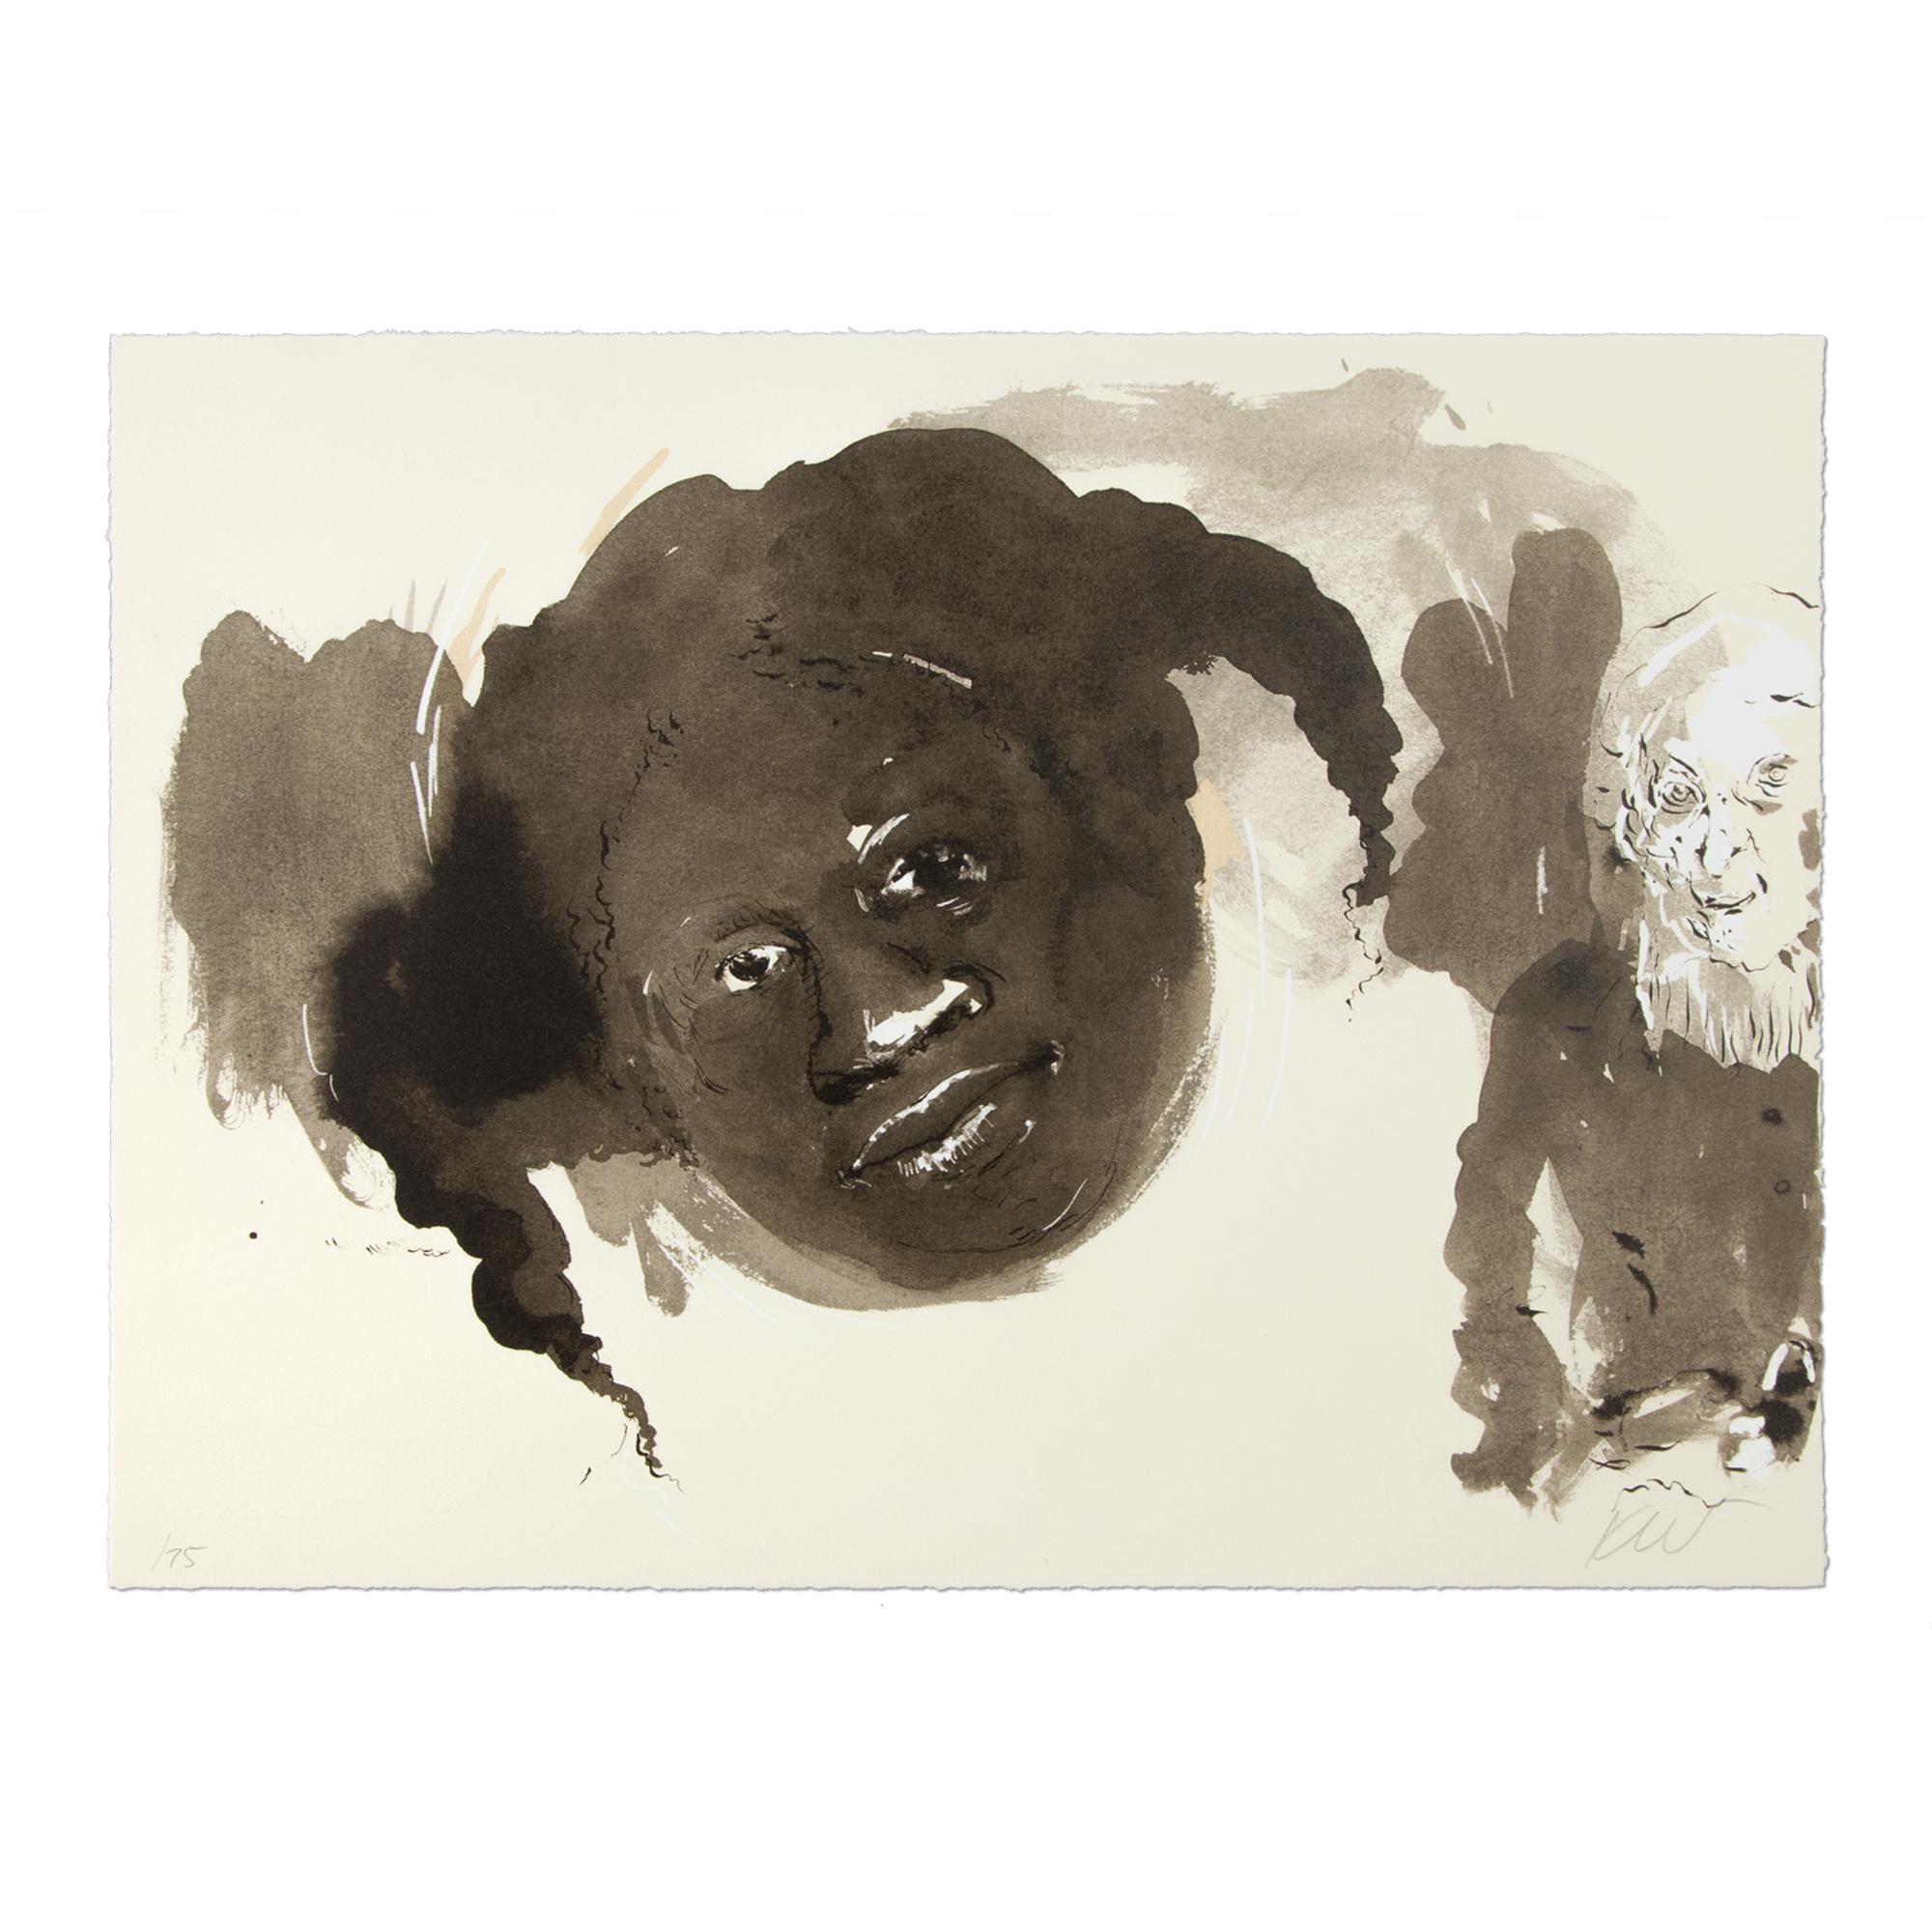 Kara Walker (b 1969)
Untitled (from "The Gross Clinician Presents: Pater Gravidam")
Medium: Photolithograph, on Rives BFK paper
Dimensions: 27.5 x 38.1 cm
Edition of 75: Hand-signed and numbered
Condition: Mint